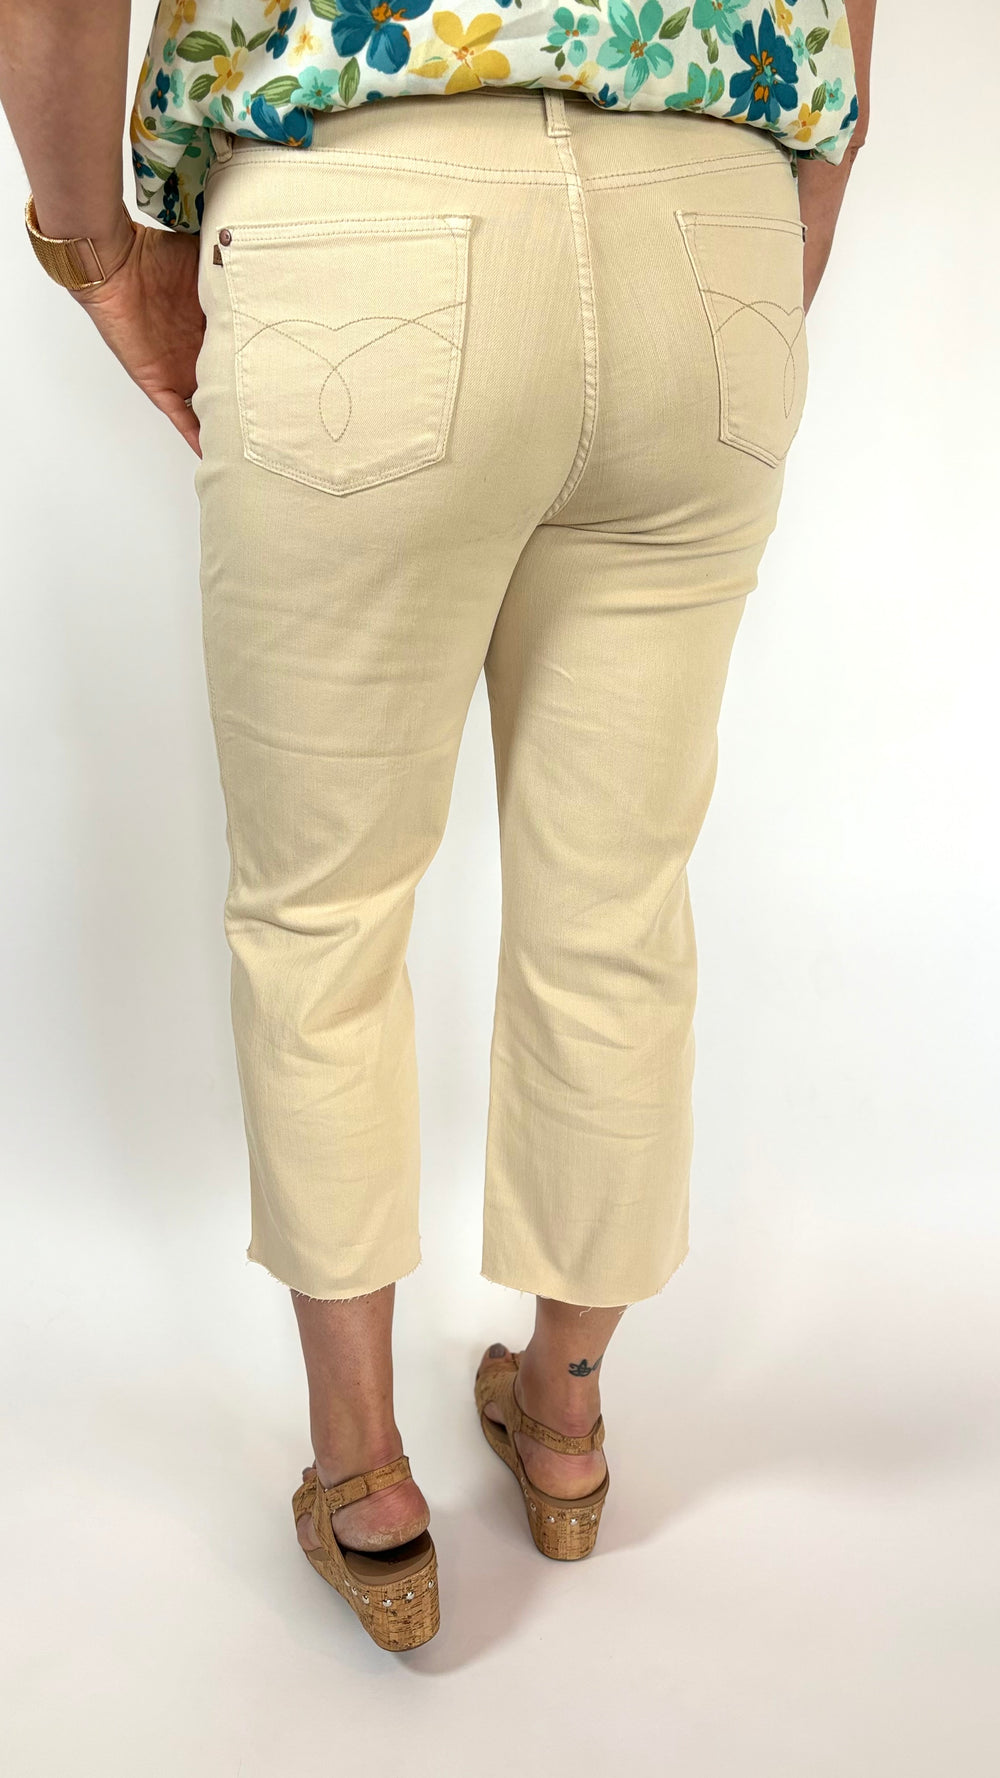 Judy Blue Cropped Jeans, Bone-Jeans-Judy Blue-Evergreen Boutique, Women’s Fashion Boutique in Santa Claus, Indiana